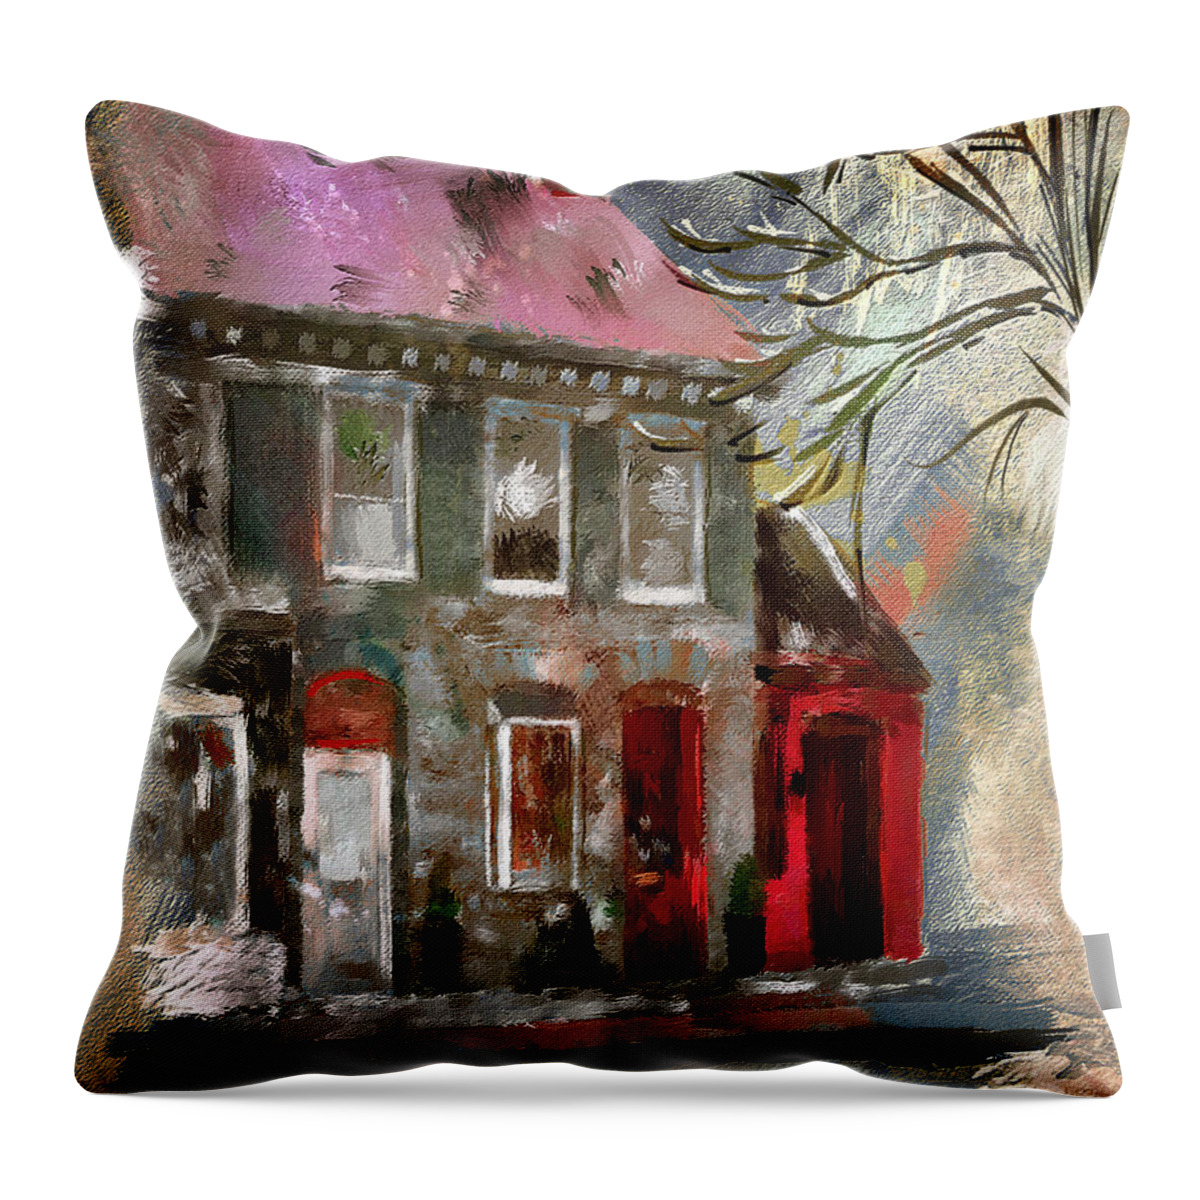 Architecture Throw Pillow featuring the digital art Small Town Shops by Lois Bryan